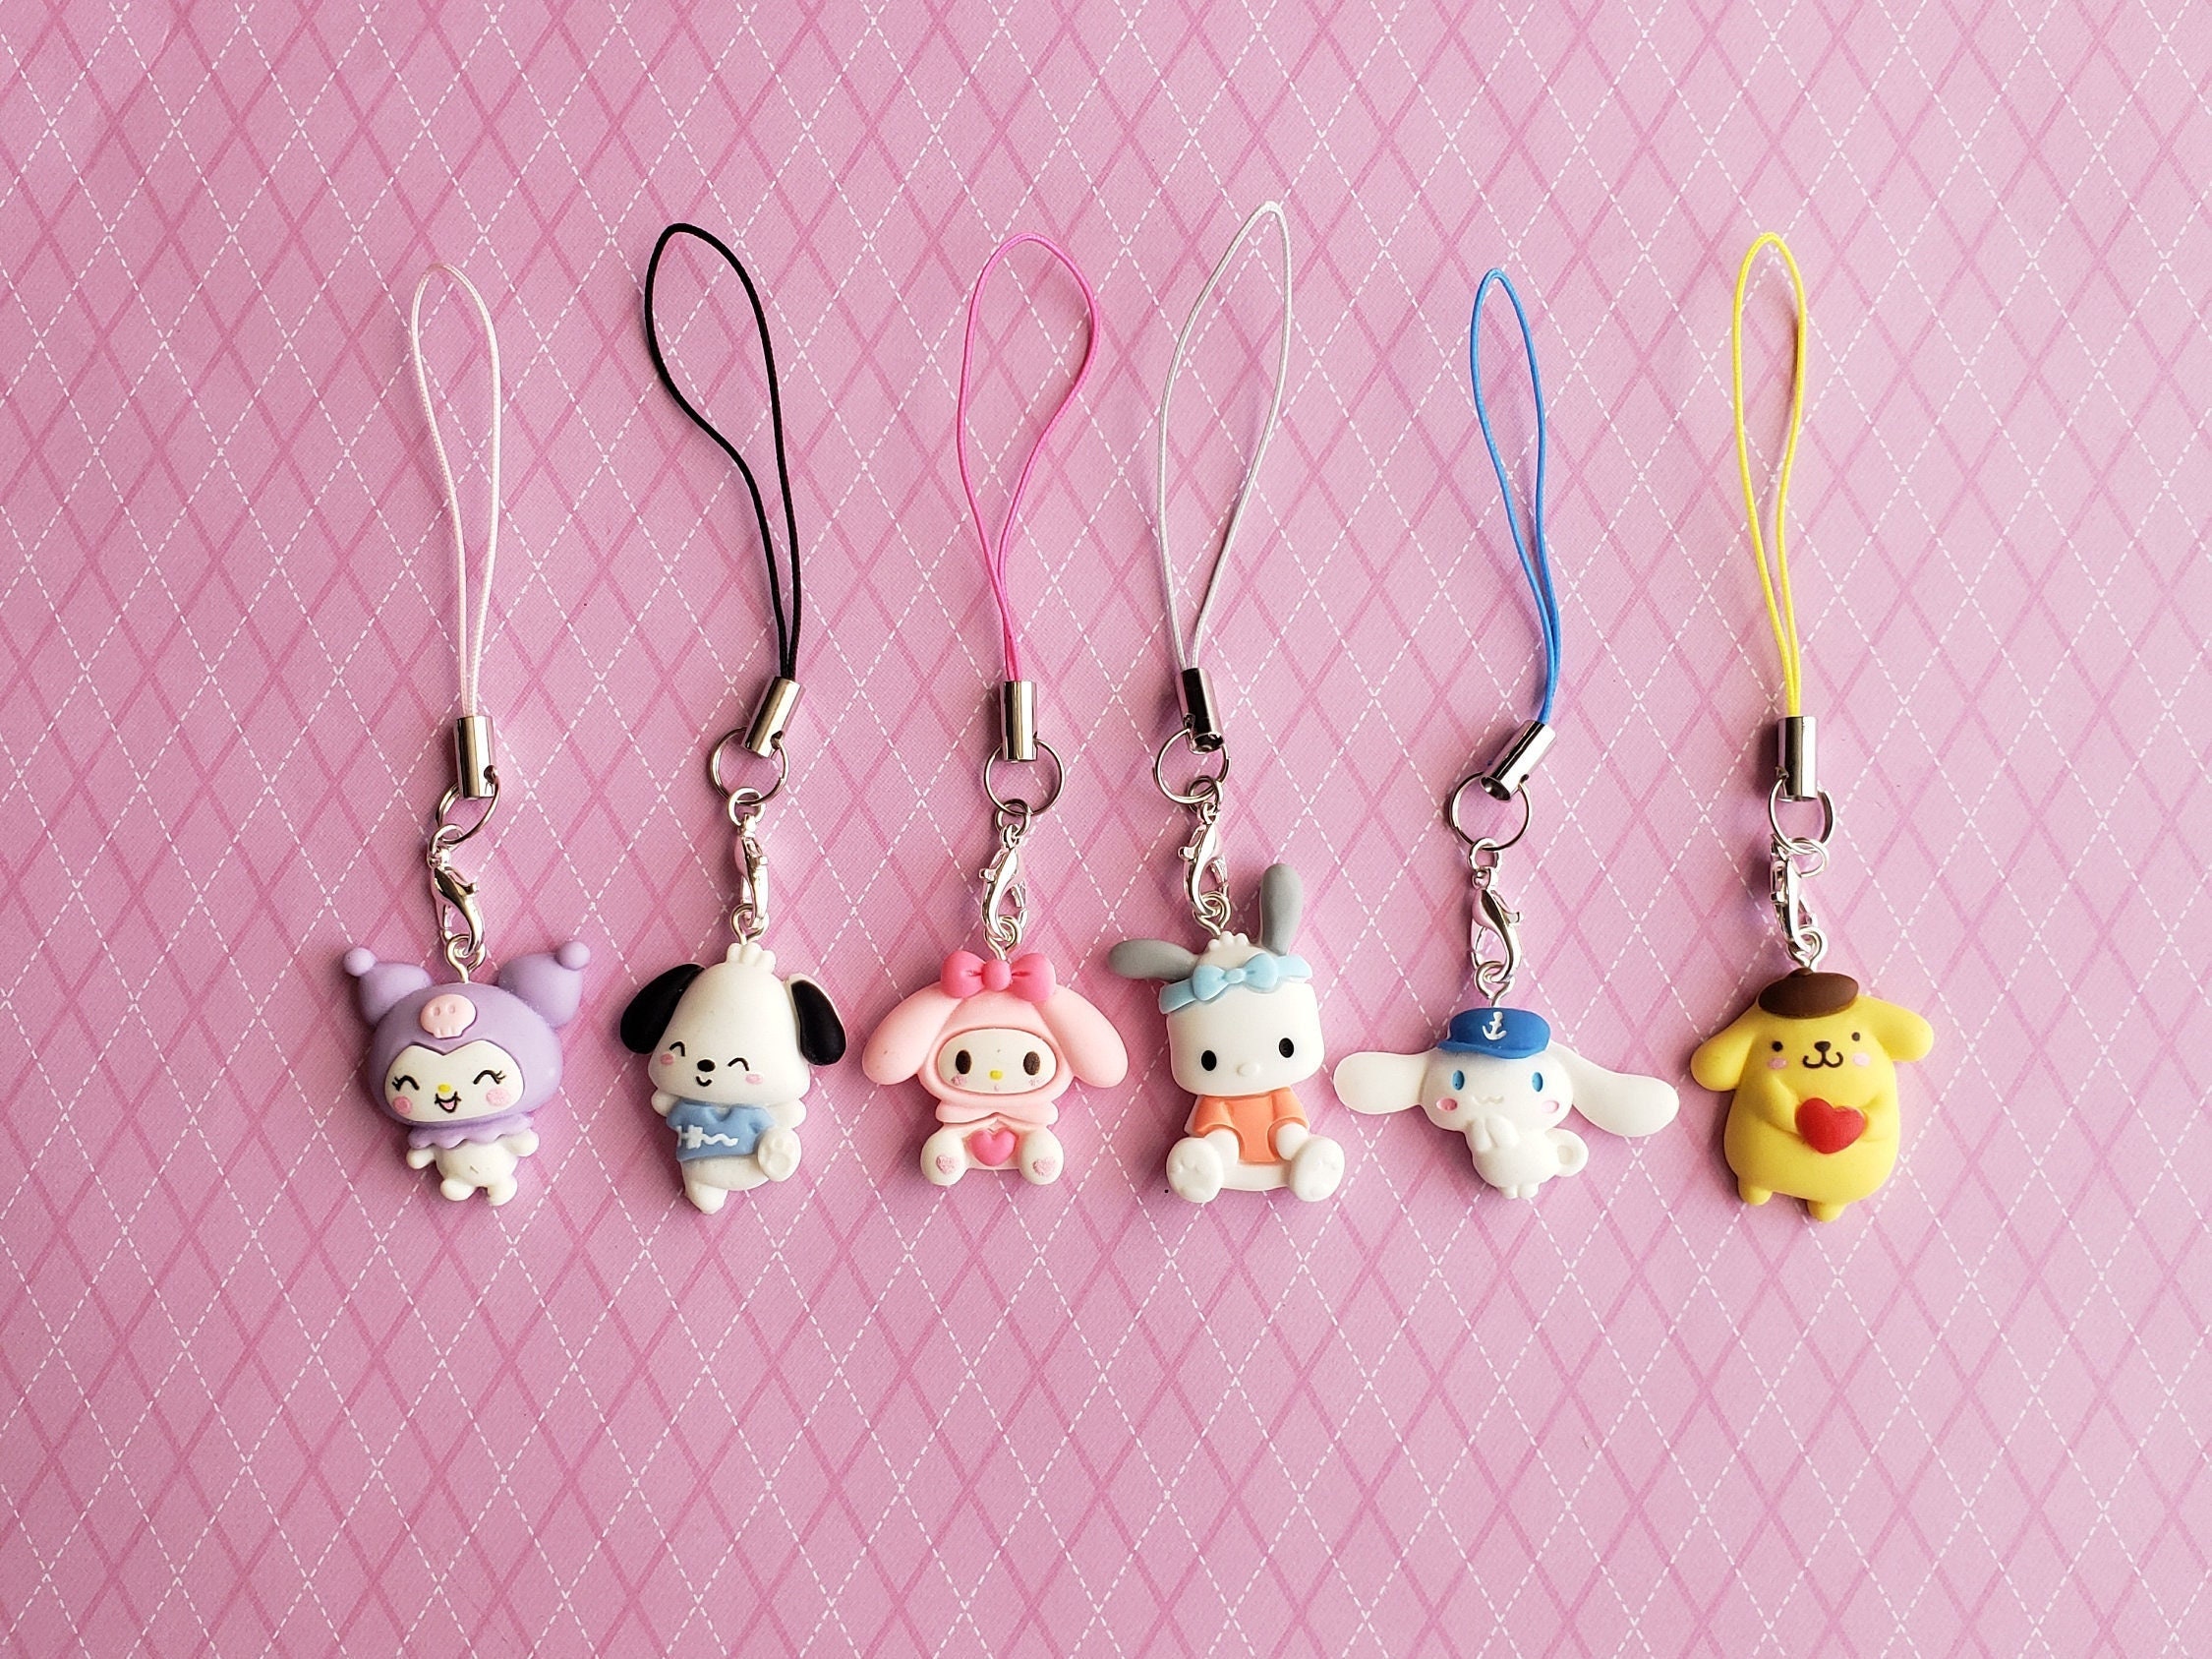 Sanrio Two charmmy kitty beads charms pendants you choice ·  Littlekittencreations · Online Store Powered by Storenvy